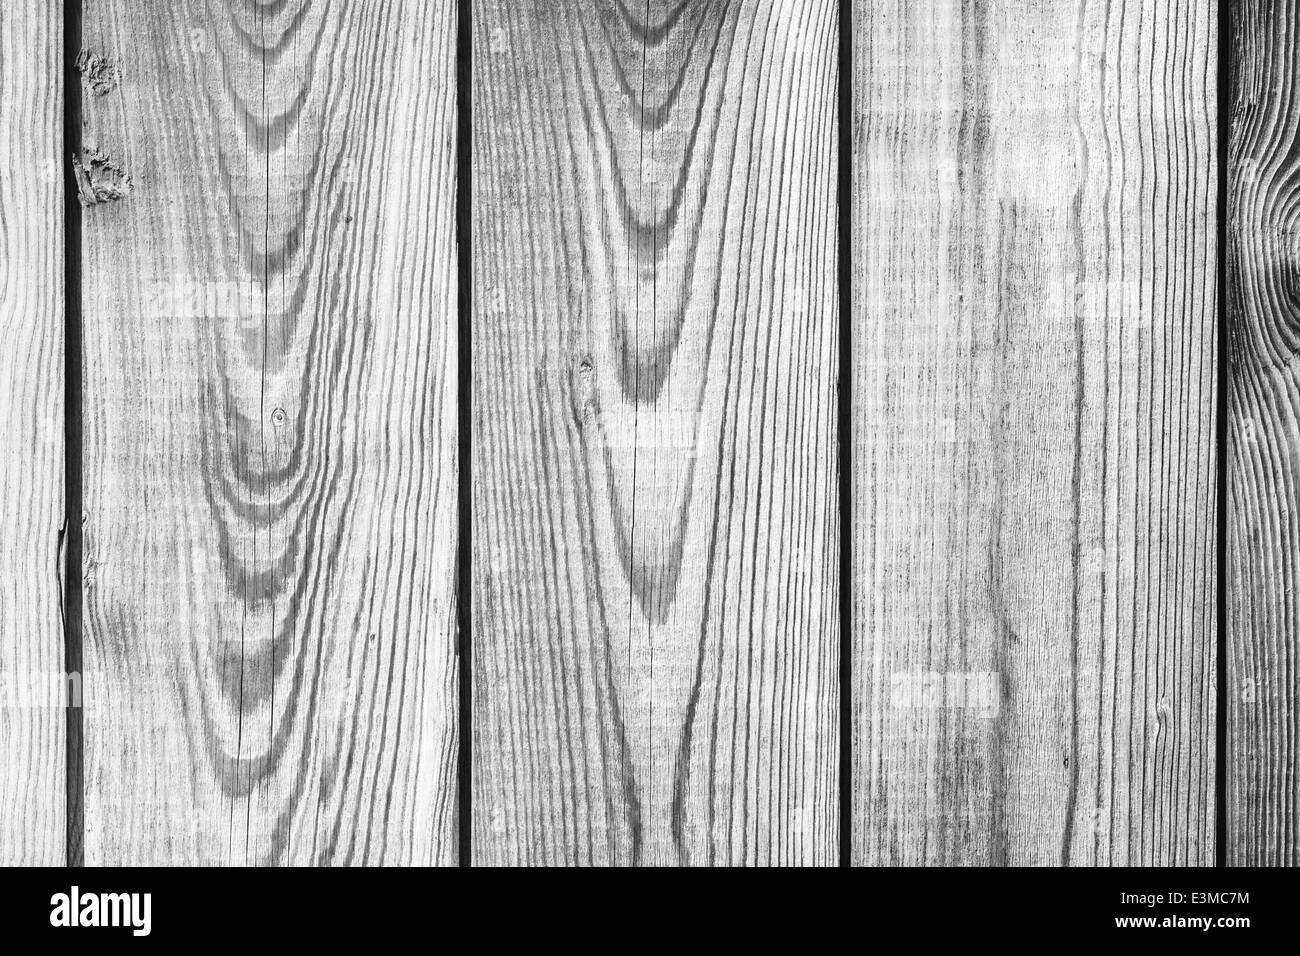 Old dark wooden wall surface. Detailed background texture Stock Photo